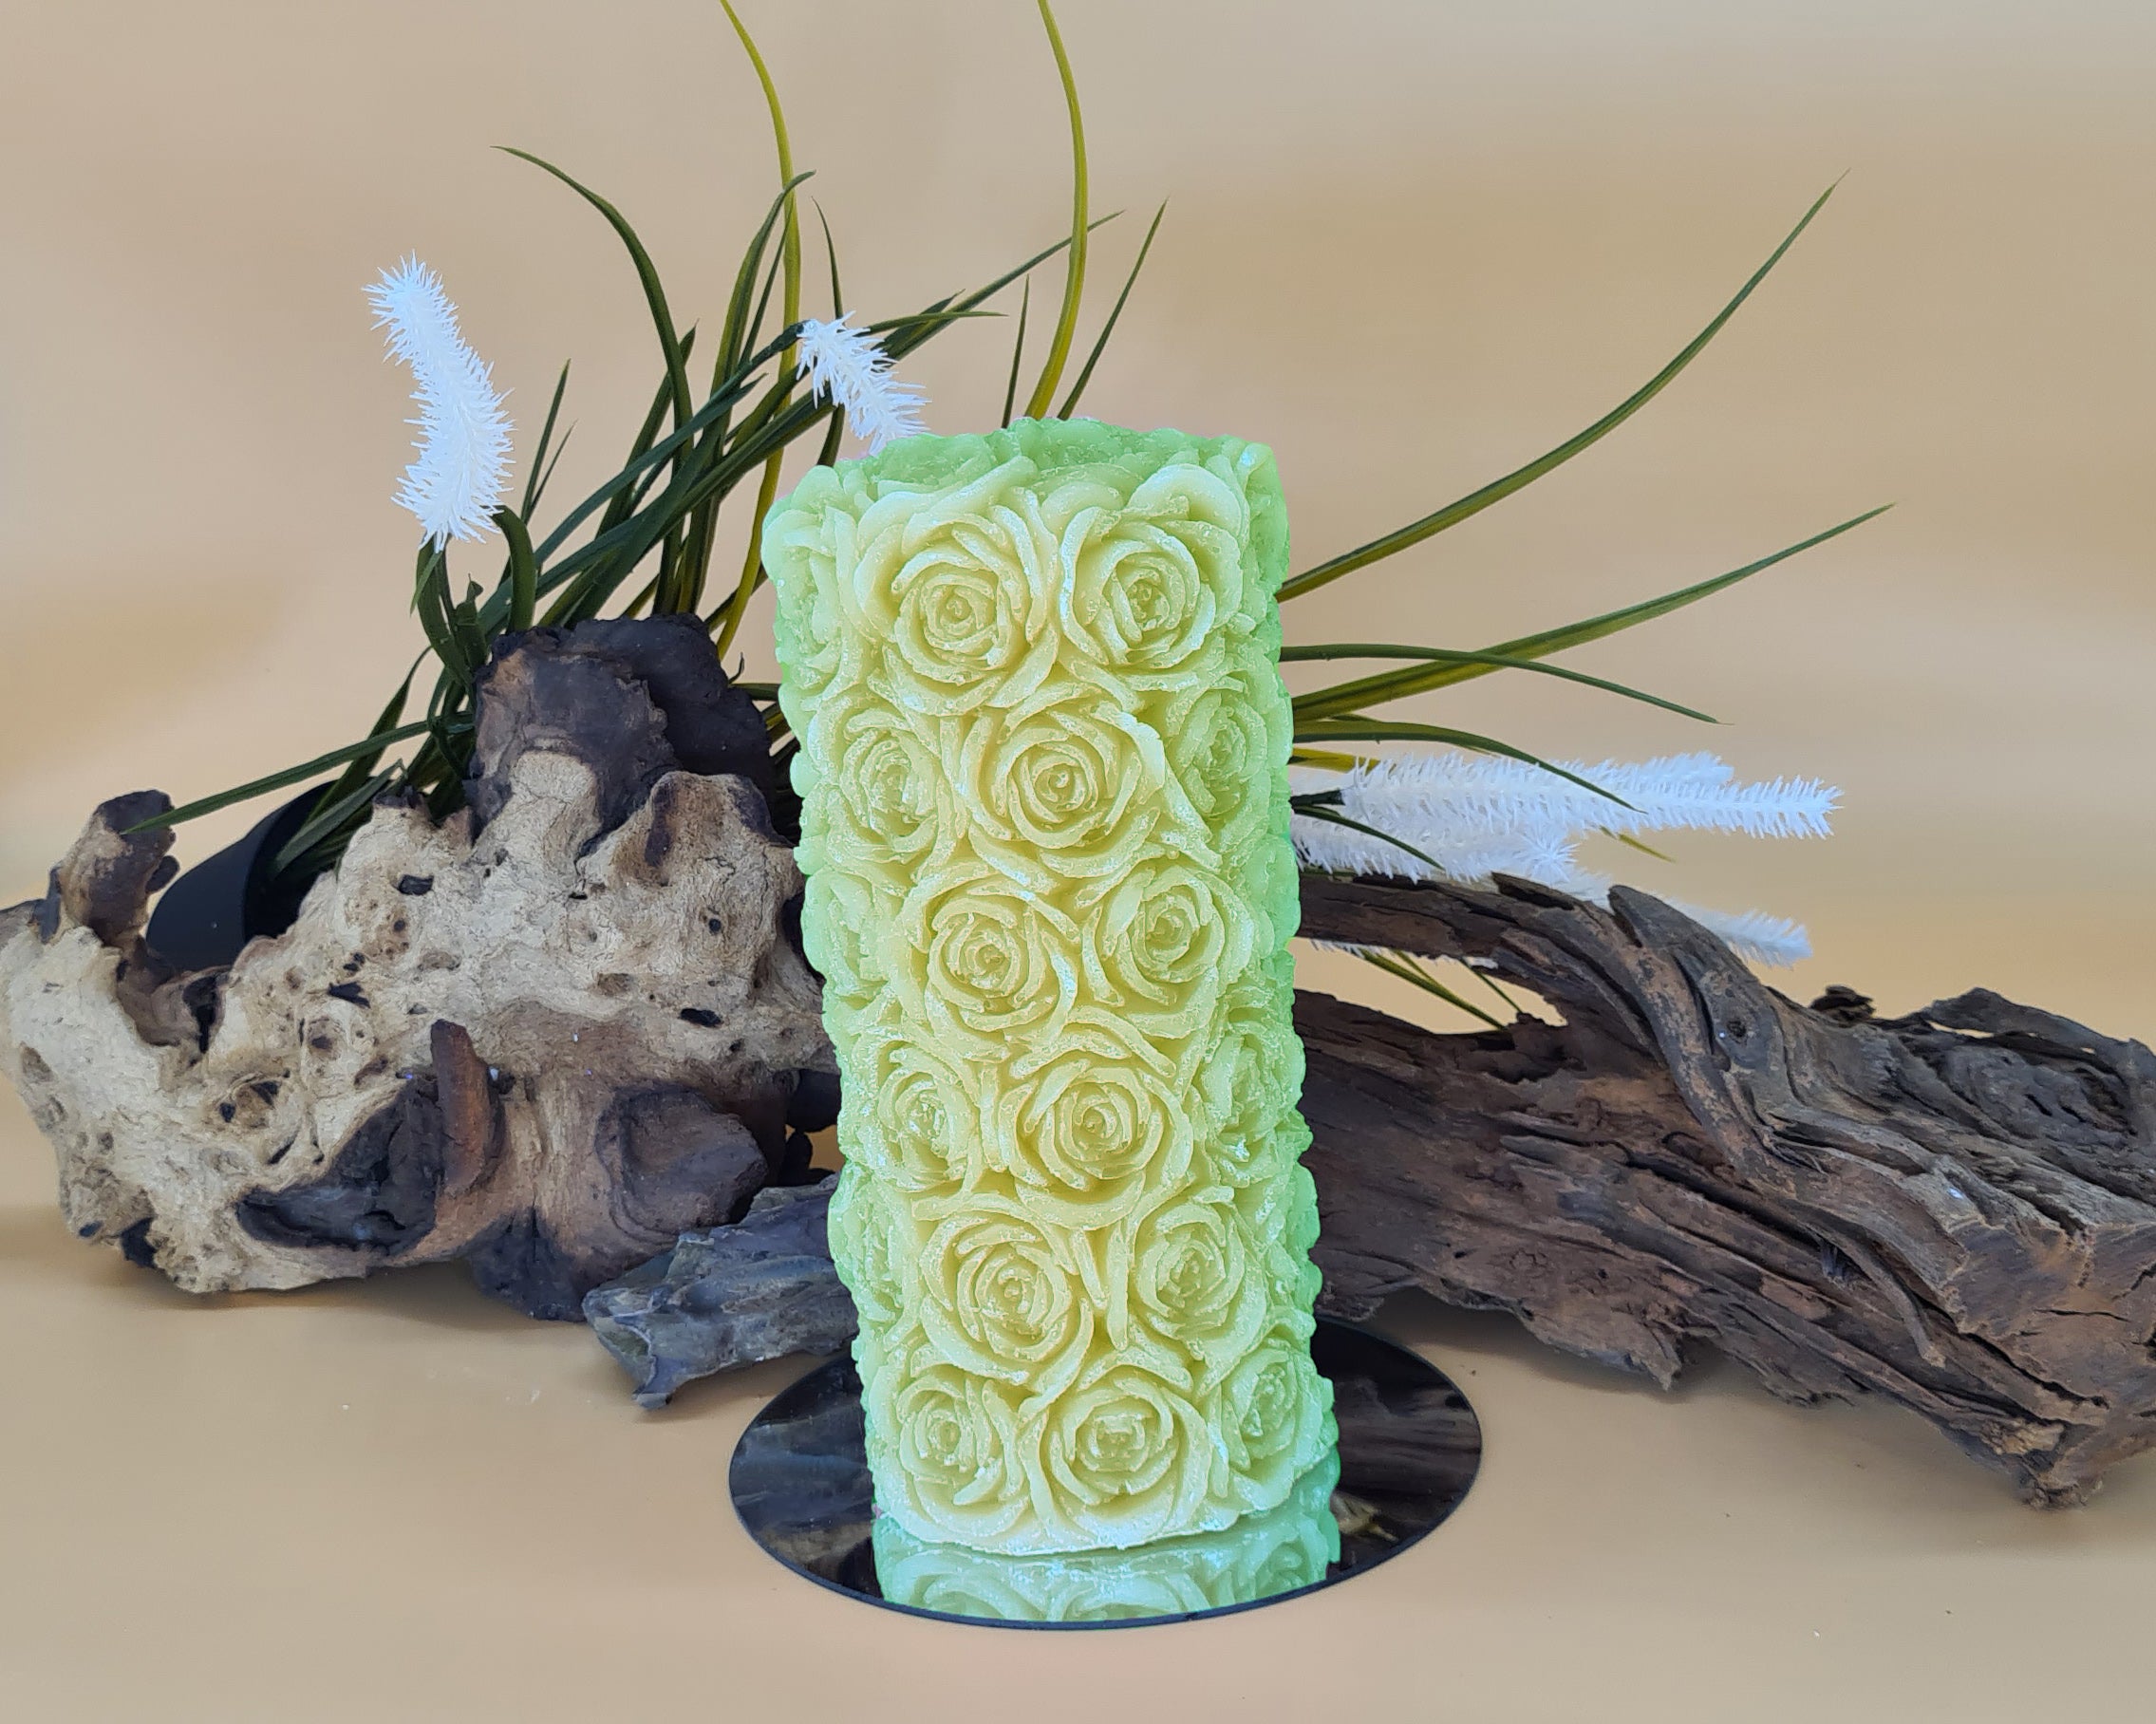 Morning Glory Flower Design Candle Molds Swirl Sculpture Pillar Candle  Silicone Mold Unique Shaped Twirl Minimalist Decor